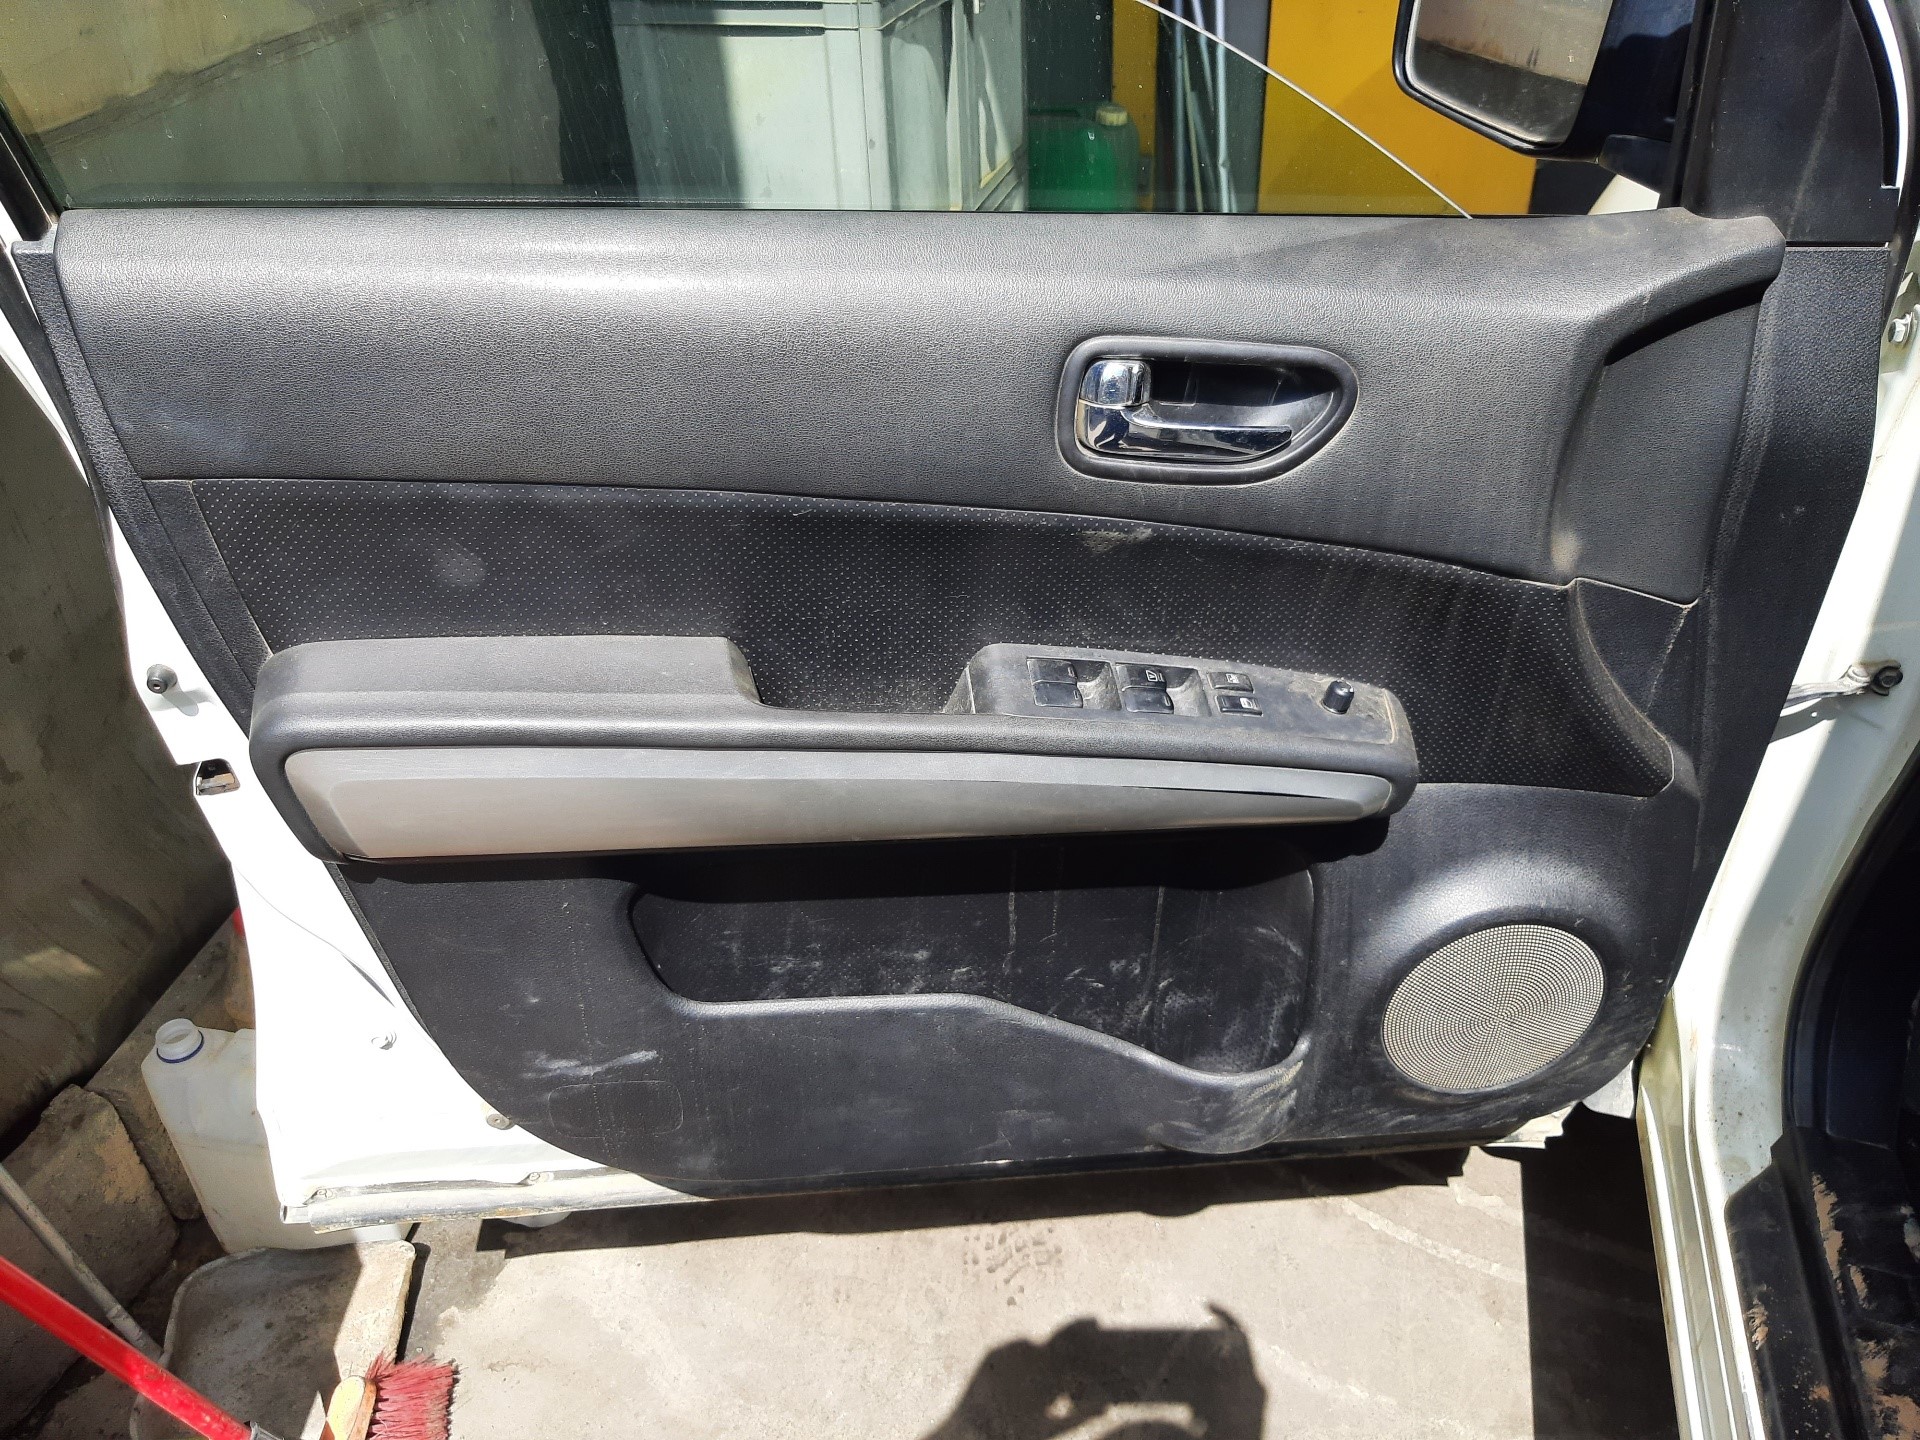 NISSAN X-Trail T31 (2007-2014) Front Right Door Window Switch 254110V000 21011816